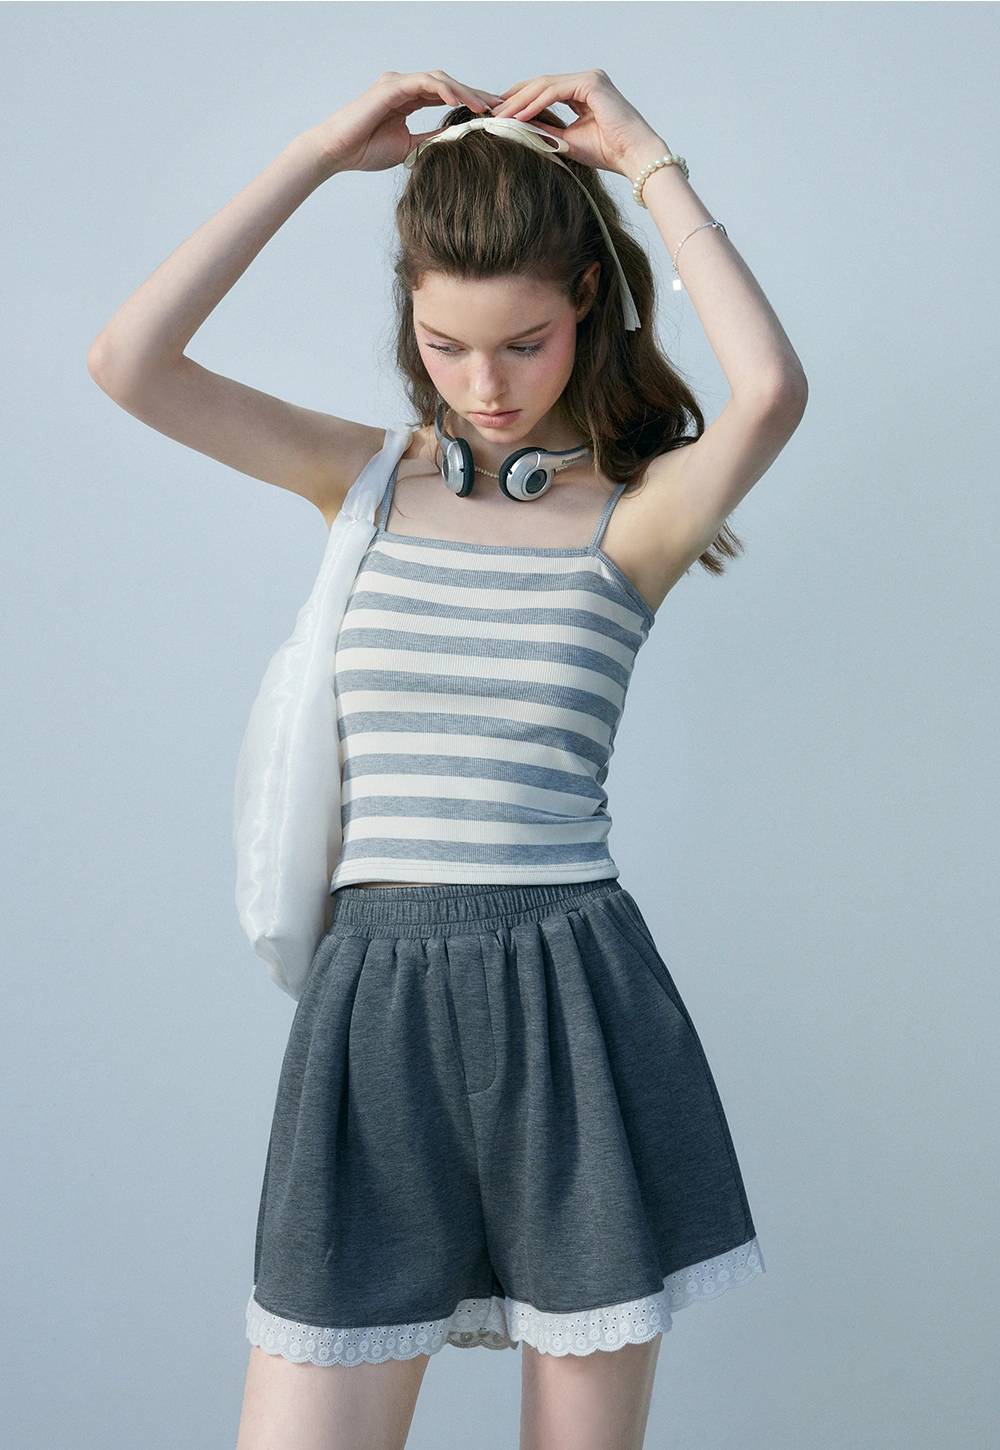 Women's Striped Camisole - Slim fit, perfect for summer layering